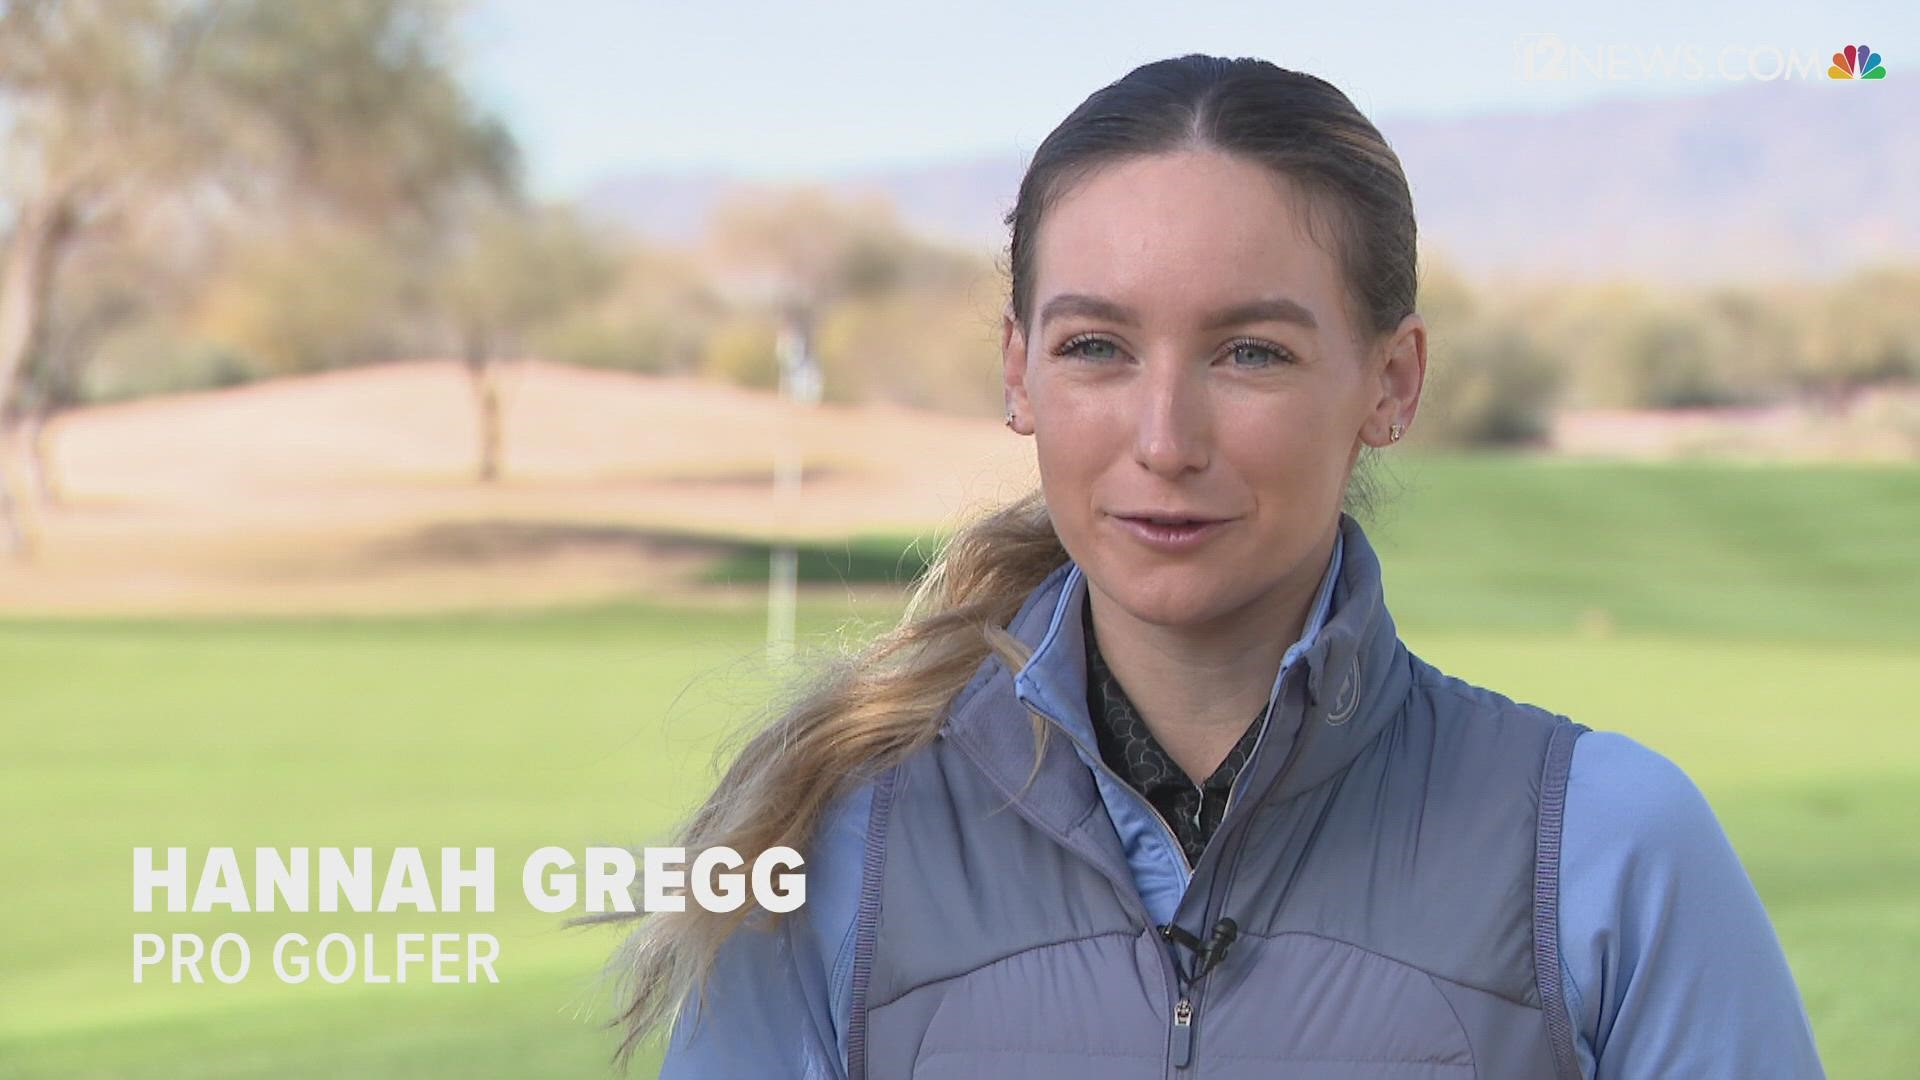 Pro golfer Hannah Gregg shares her 3 favorite courses to play in the Phoenix area.